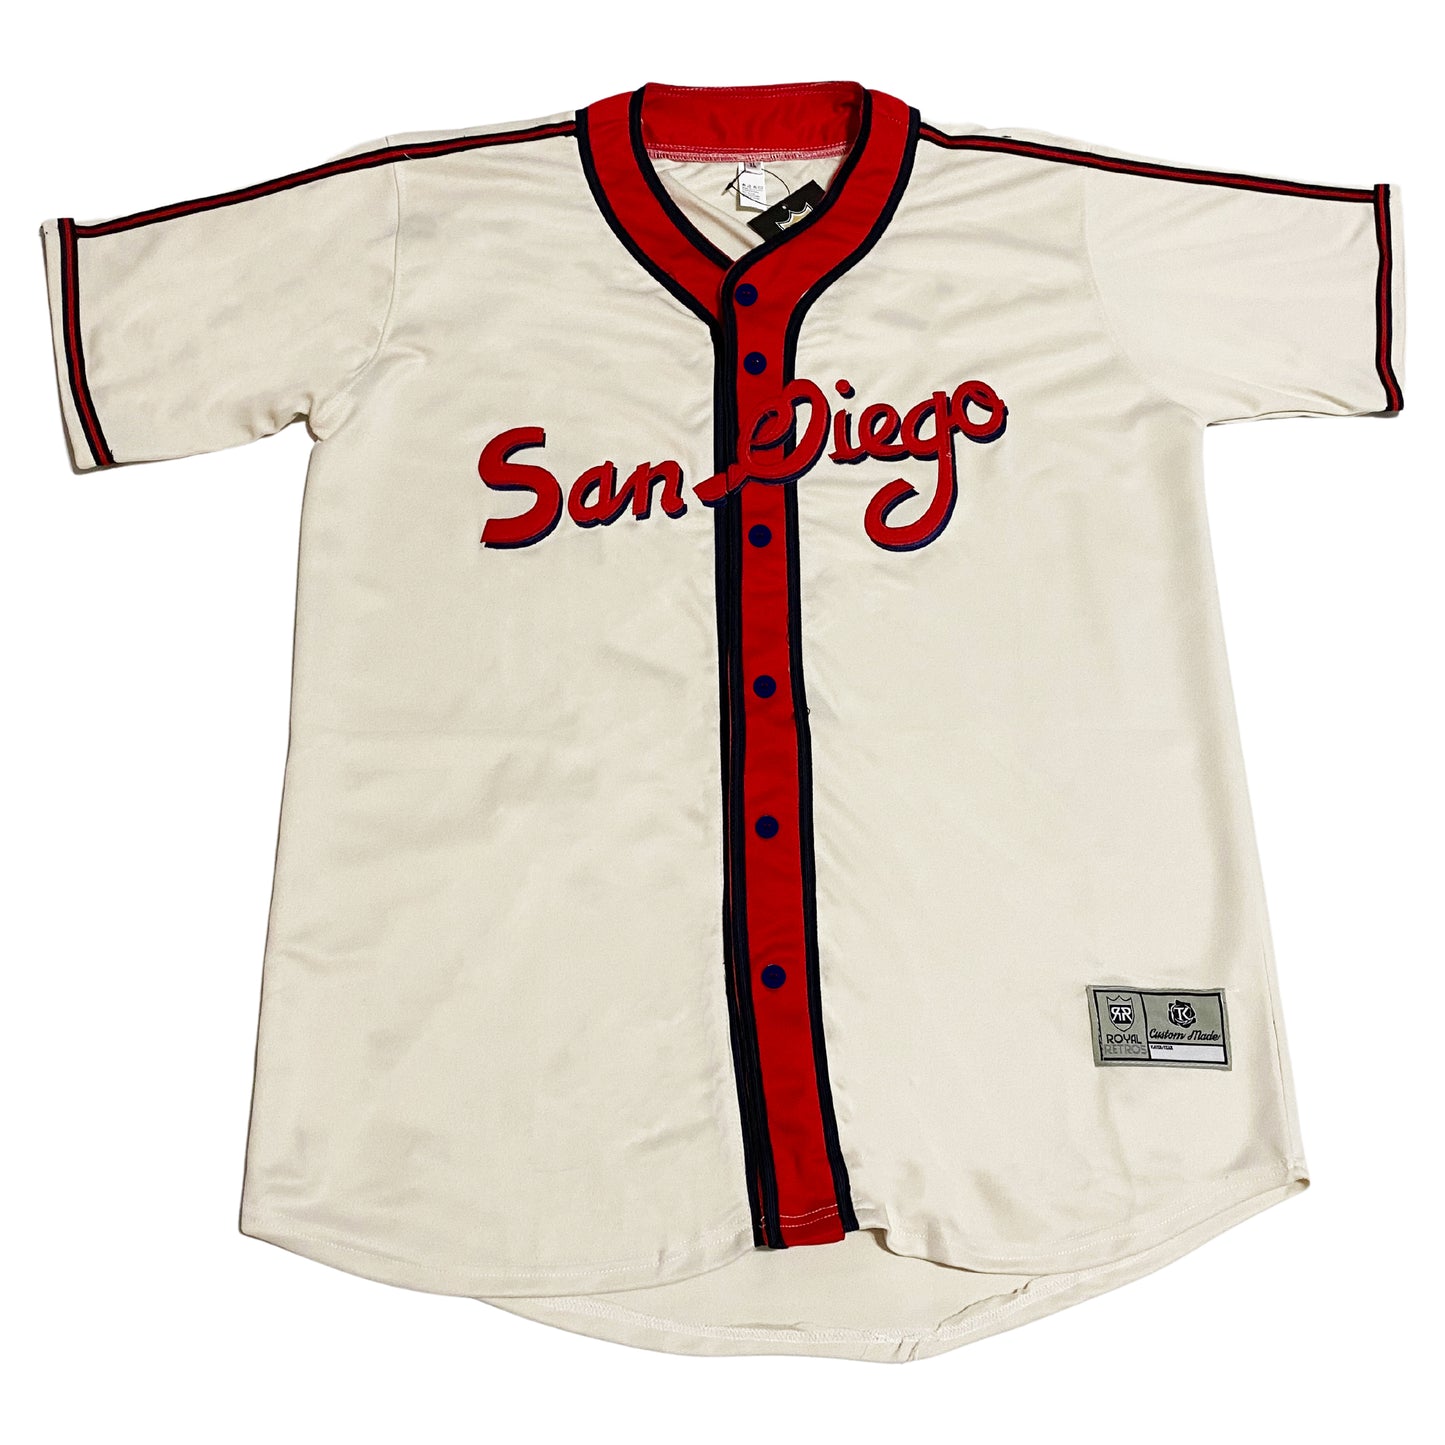 PCL Padres Home Jersey